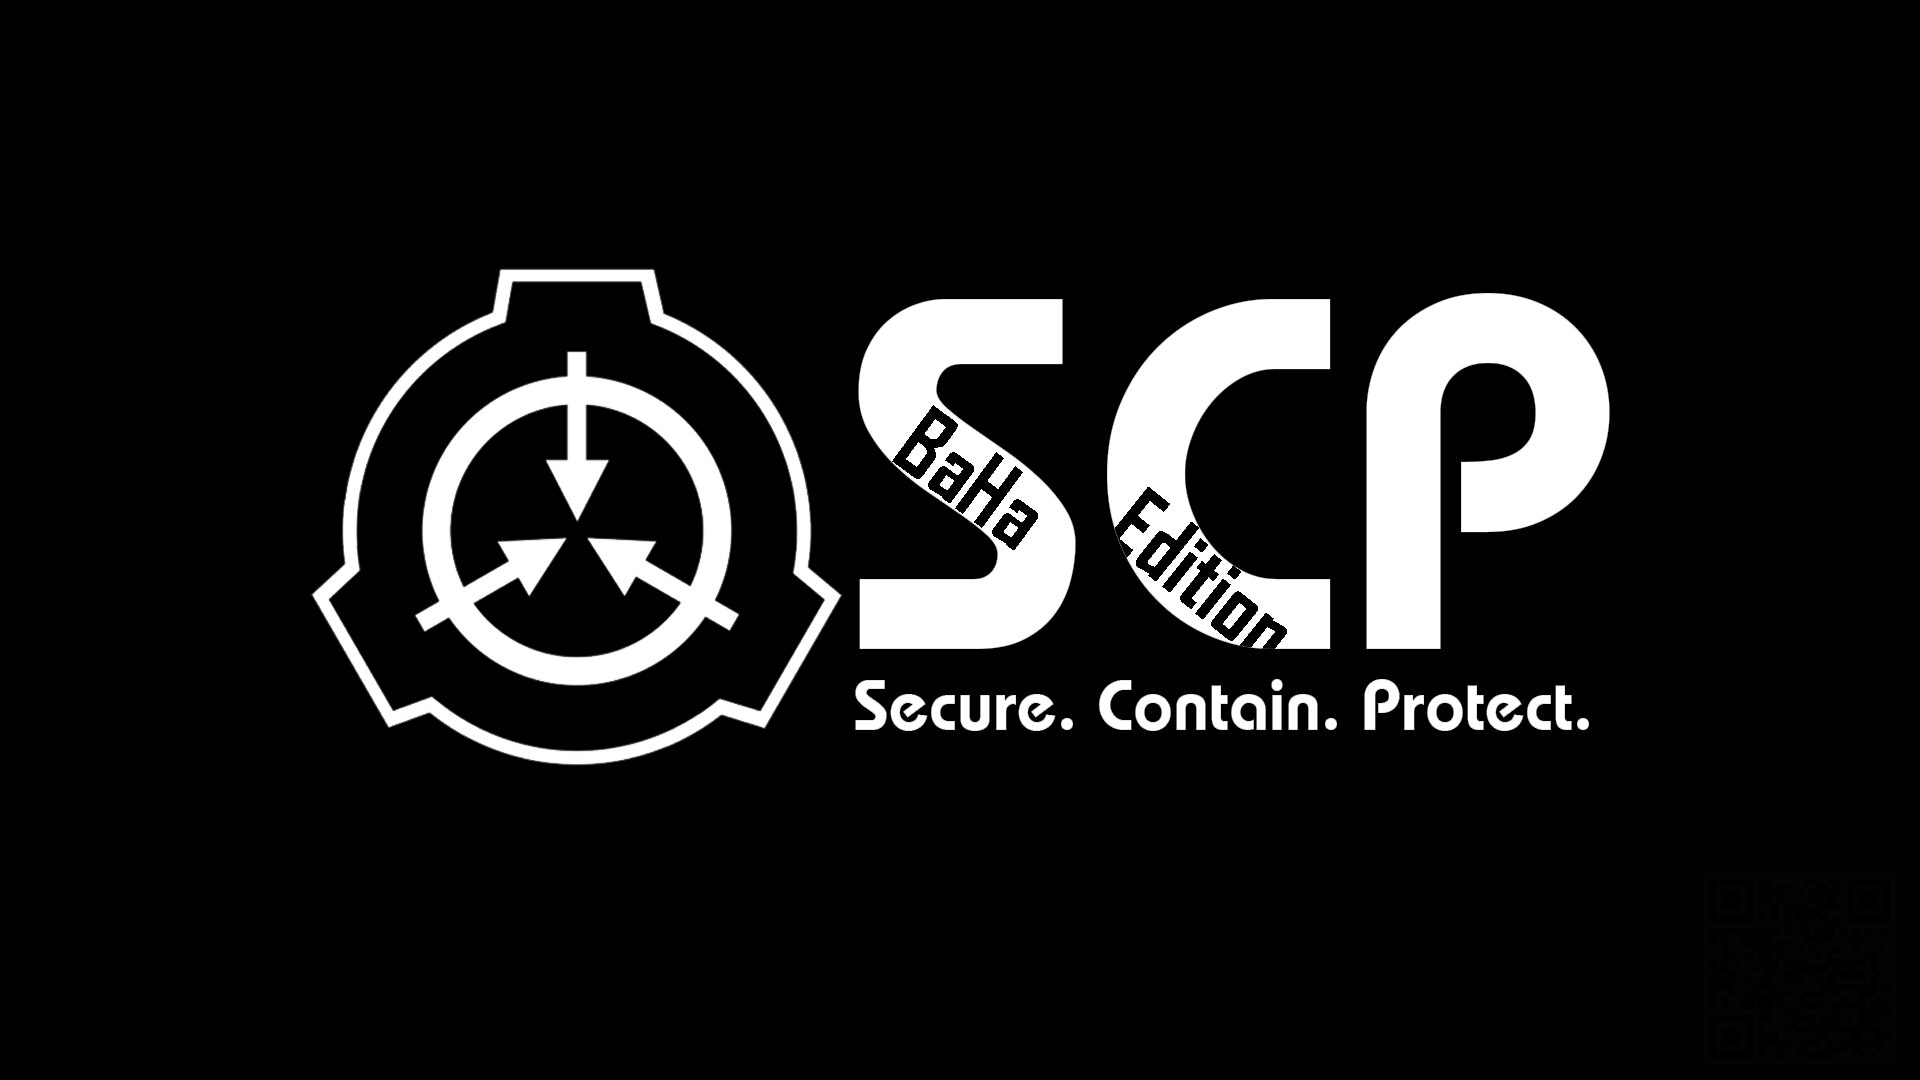 Steam Workshop::SCP-096 SCP Ultimate Edition SNPCs [DRGBASE]